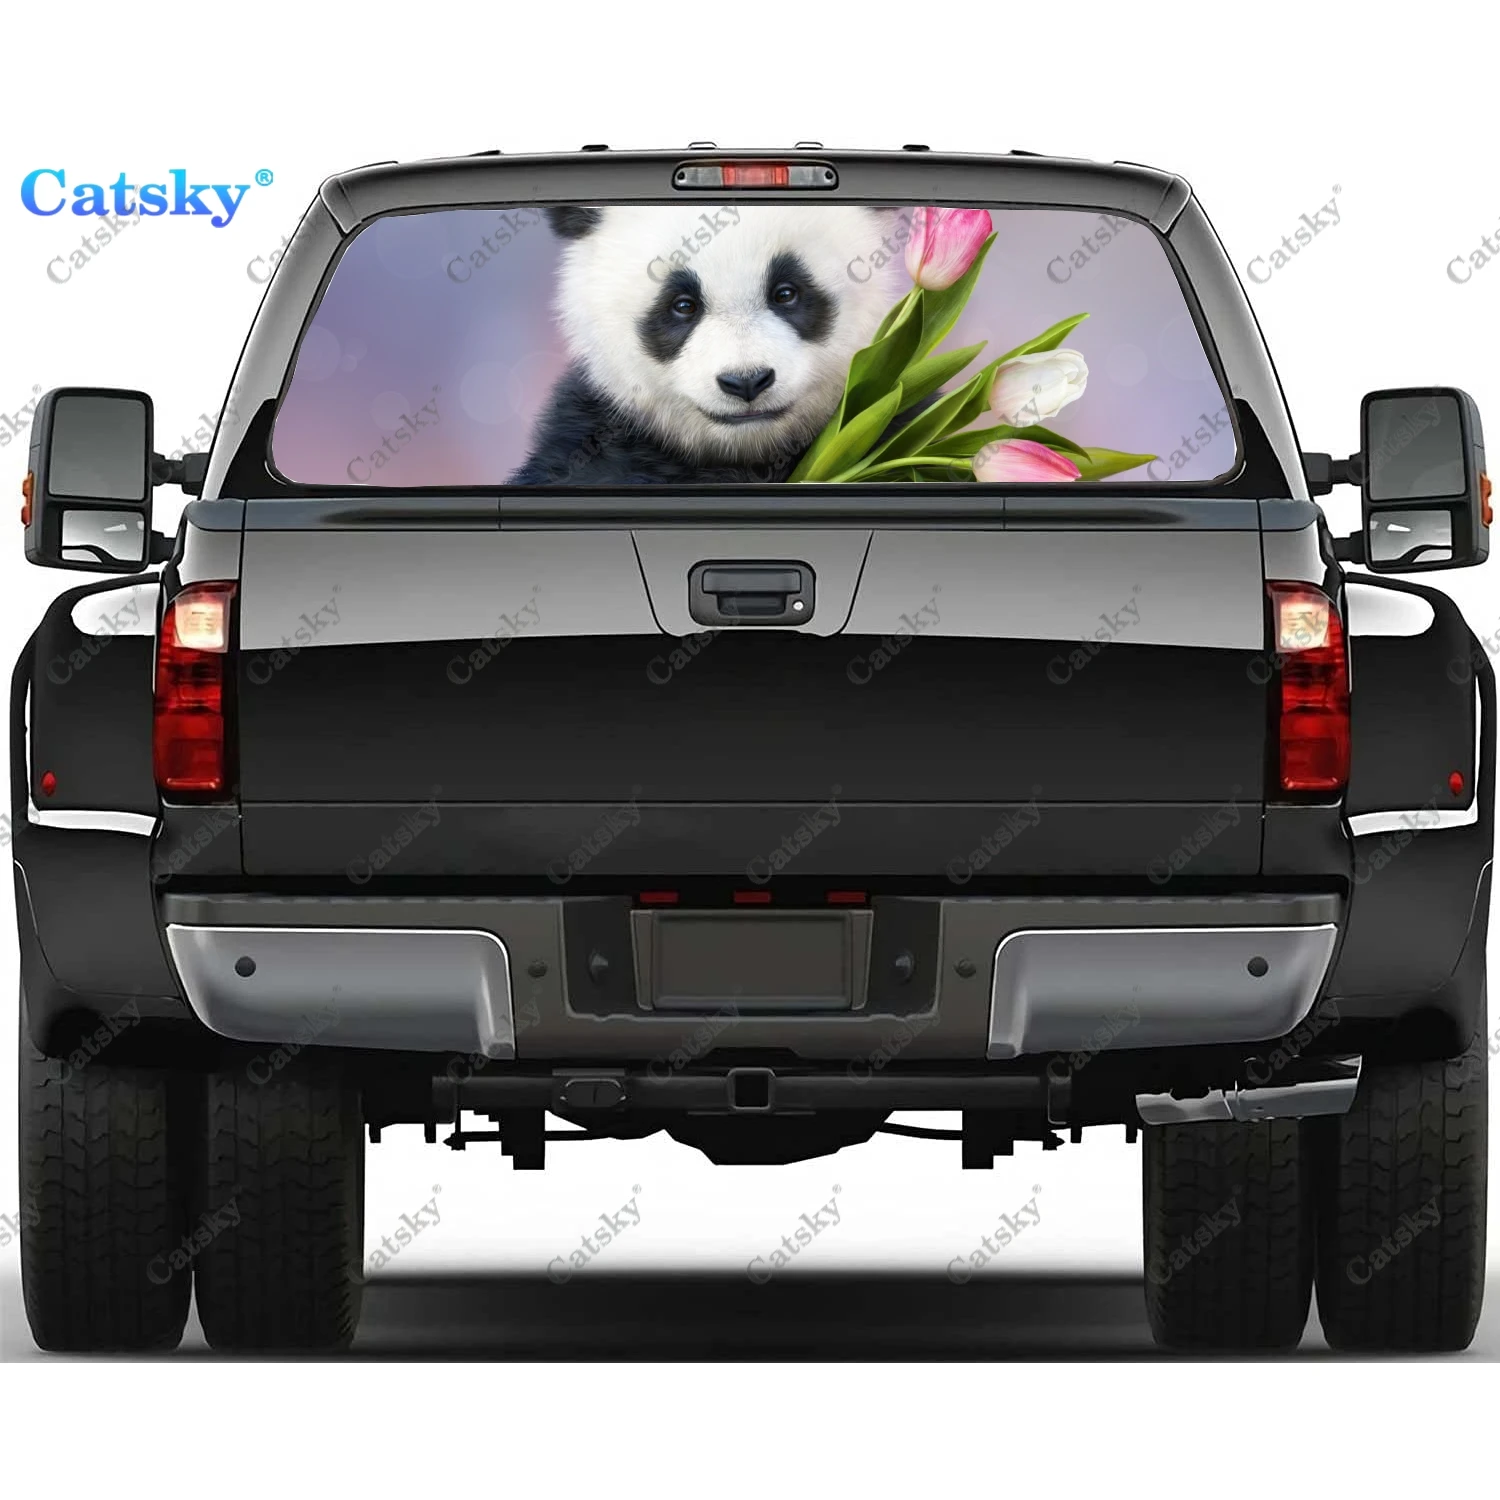 

Animal Panda Design Rear Window Stickers Windshield Decal Truck Rear Window Decal Universal Tint Perforated Vinyl Graphic